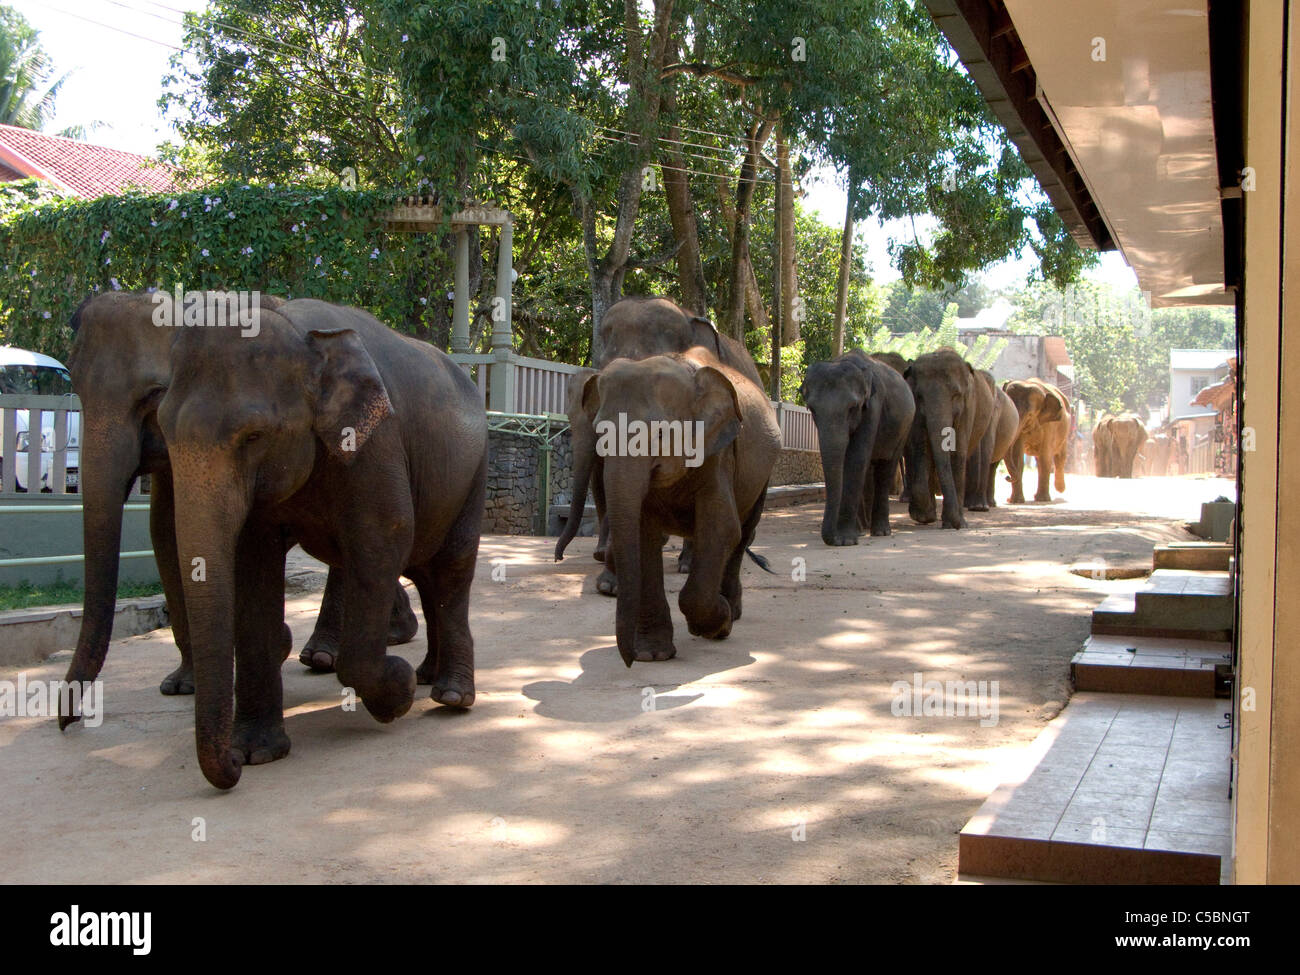 The elephants troop through the town of Pinnewala to the Ma Oya river for their morning bathe. Sri Lanka. Stock Photo